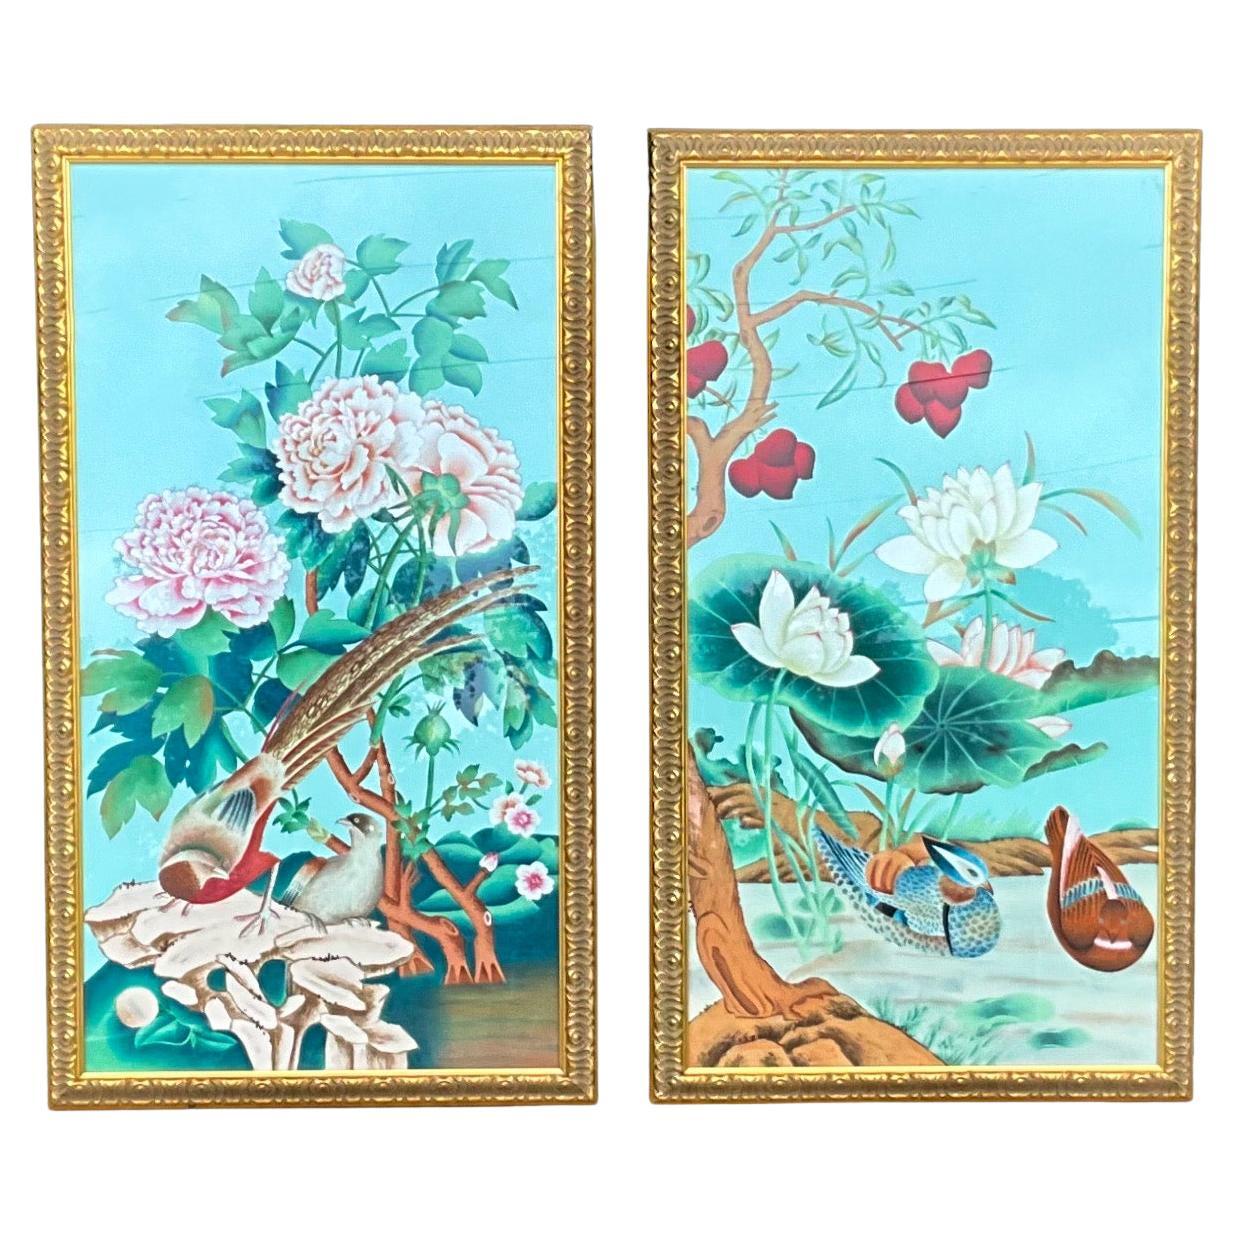 I love the vibrant colors! This is a set of large scale oil paintings hand done on silk by Chelsea House. They are Asian inspired with their birds on branches surrounded by fruit and lotus blossoms. They are nicely framed in giltwood frames. The